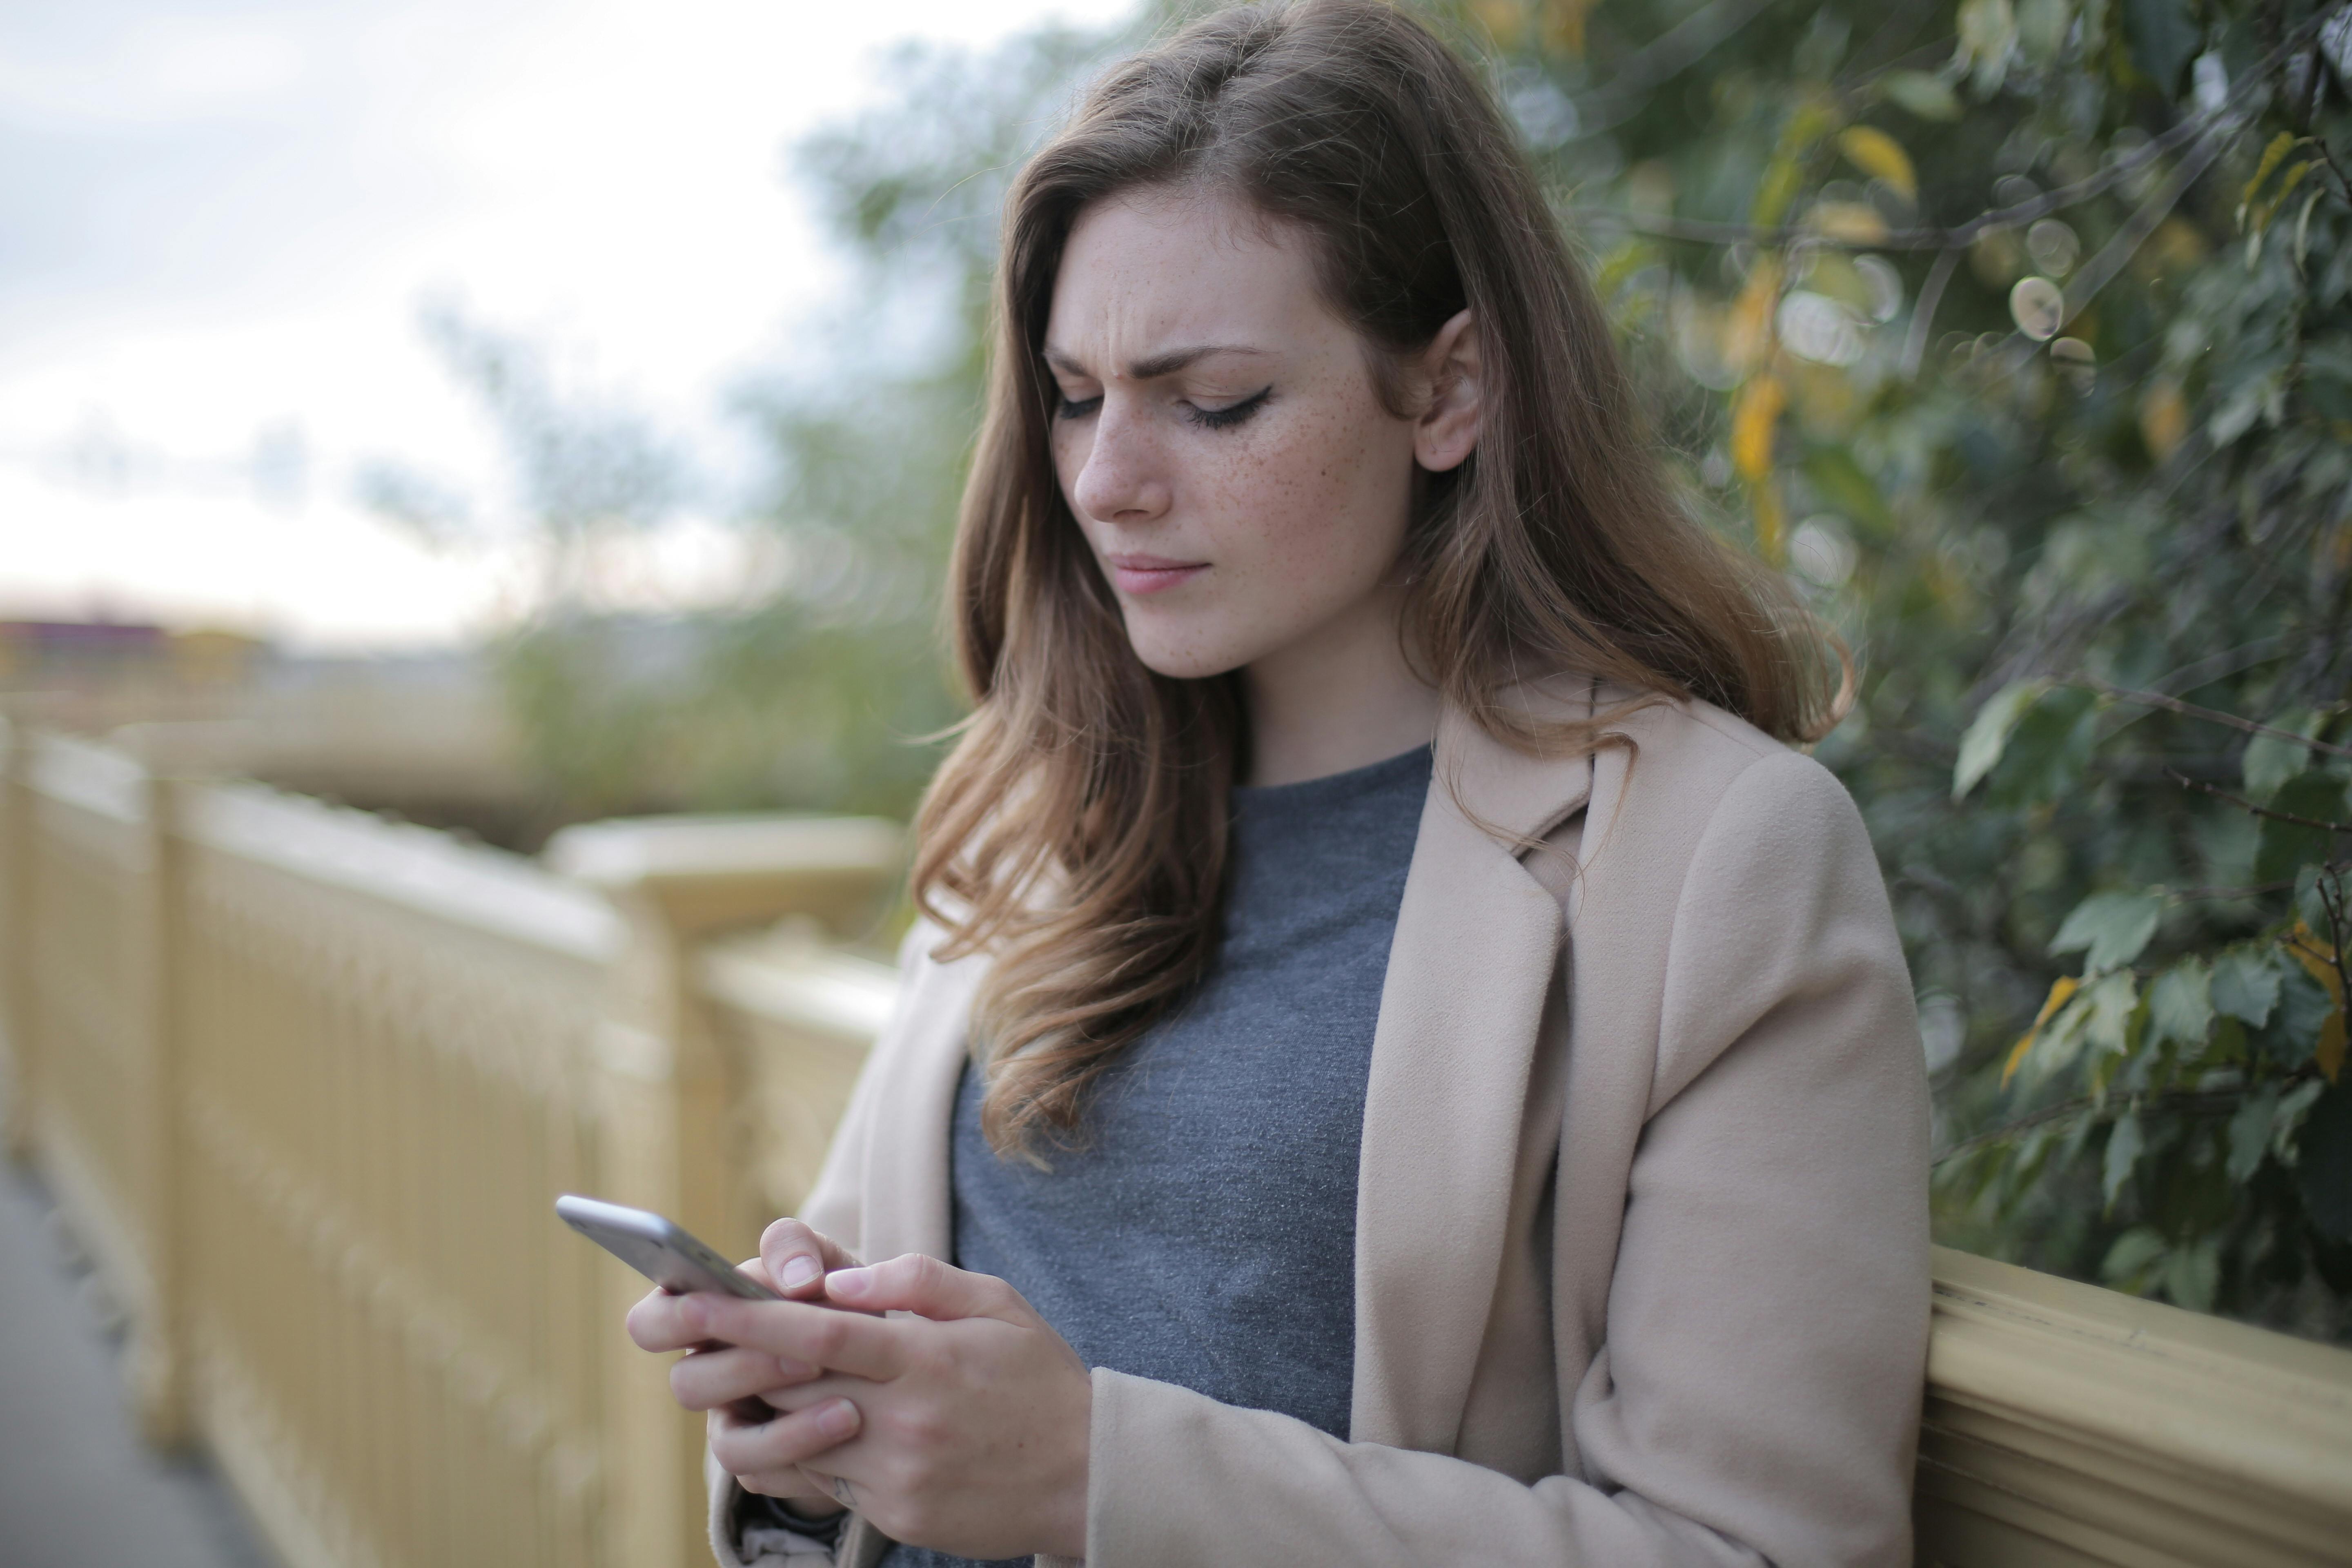 An unhappy woman reading something on her phone | Source: Pexels